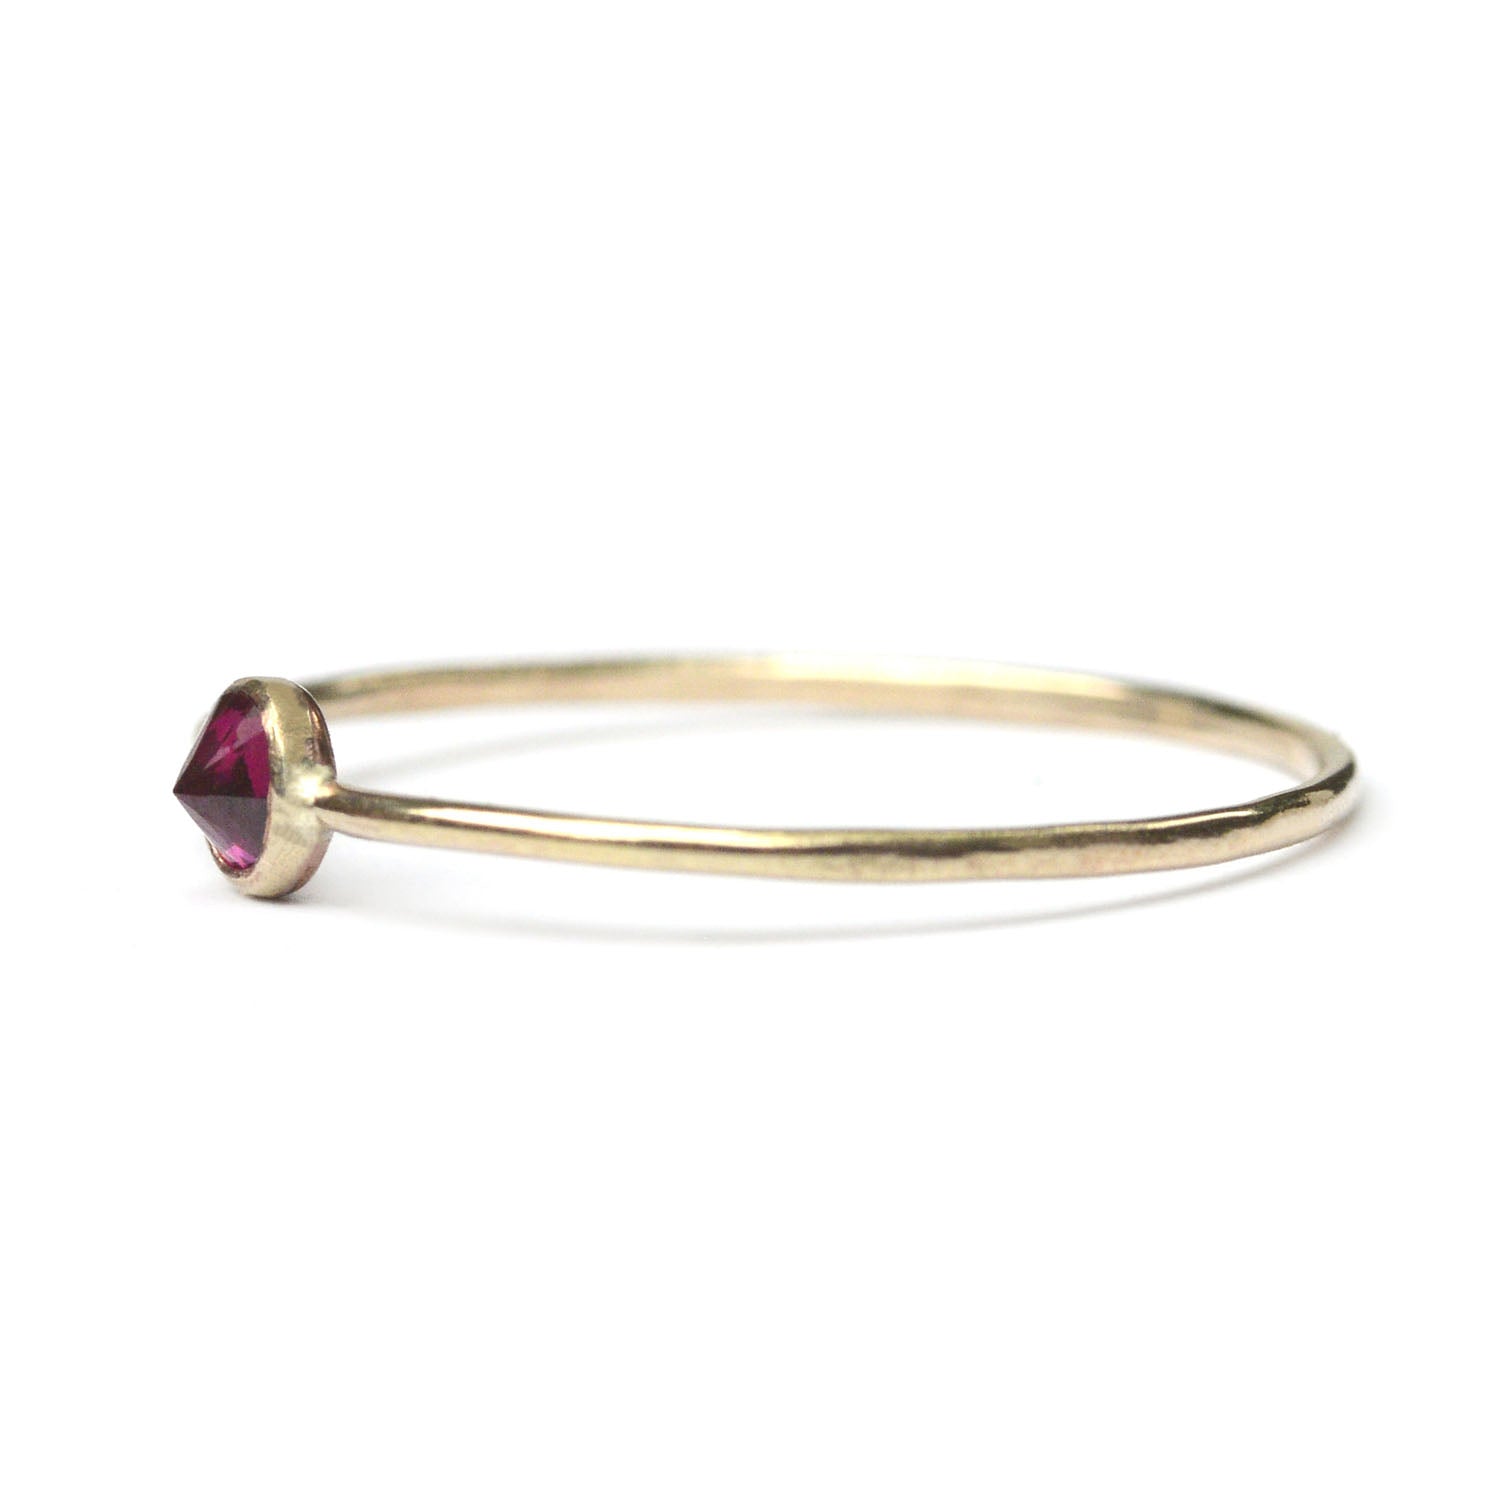 Tiny Garnet Spike Stacking Ring - Favor Jewelry